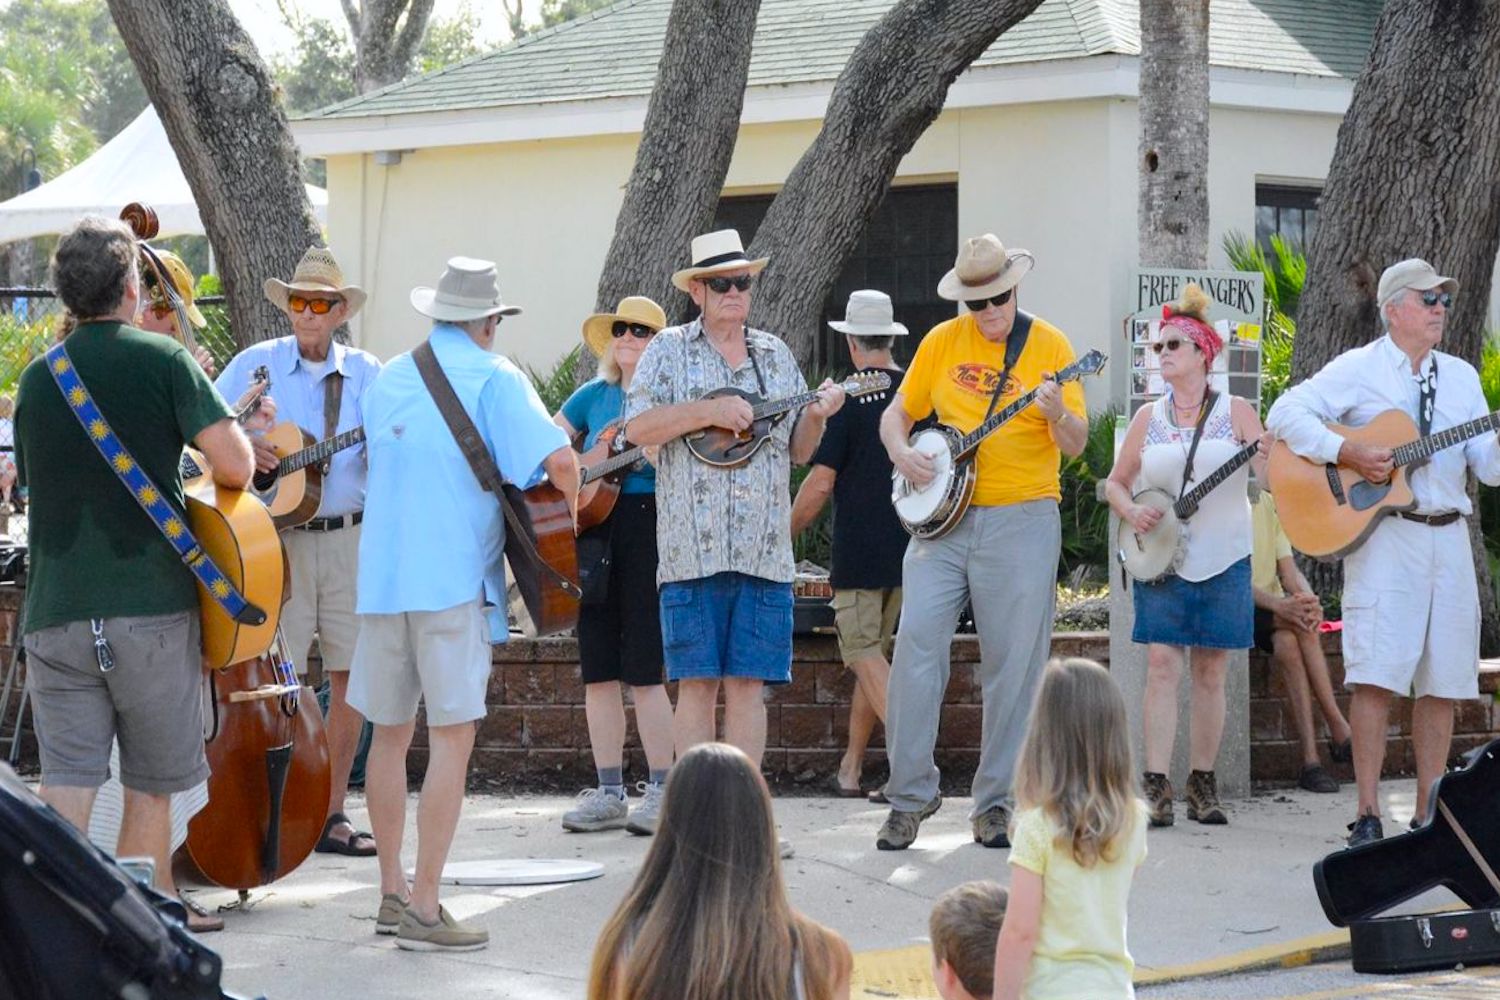 Musicians at the St. Augustine Farmers Market